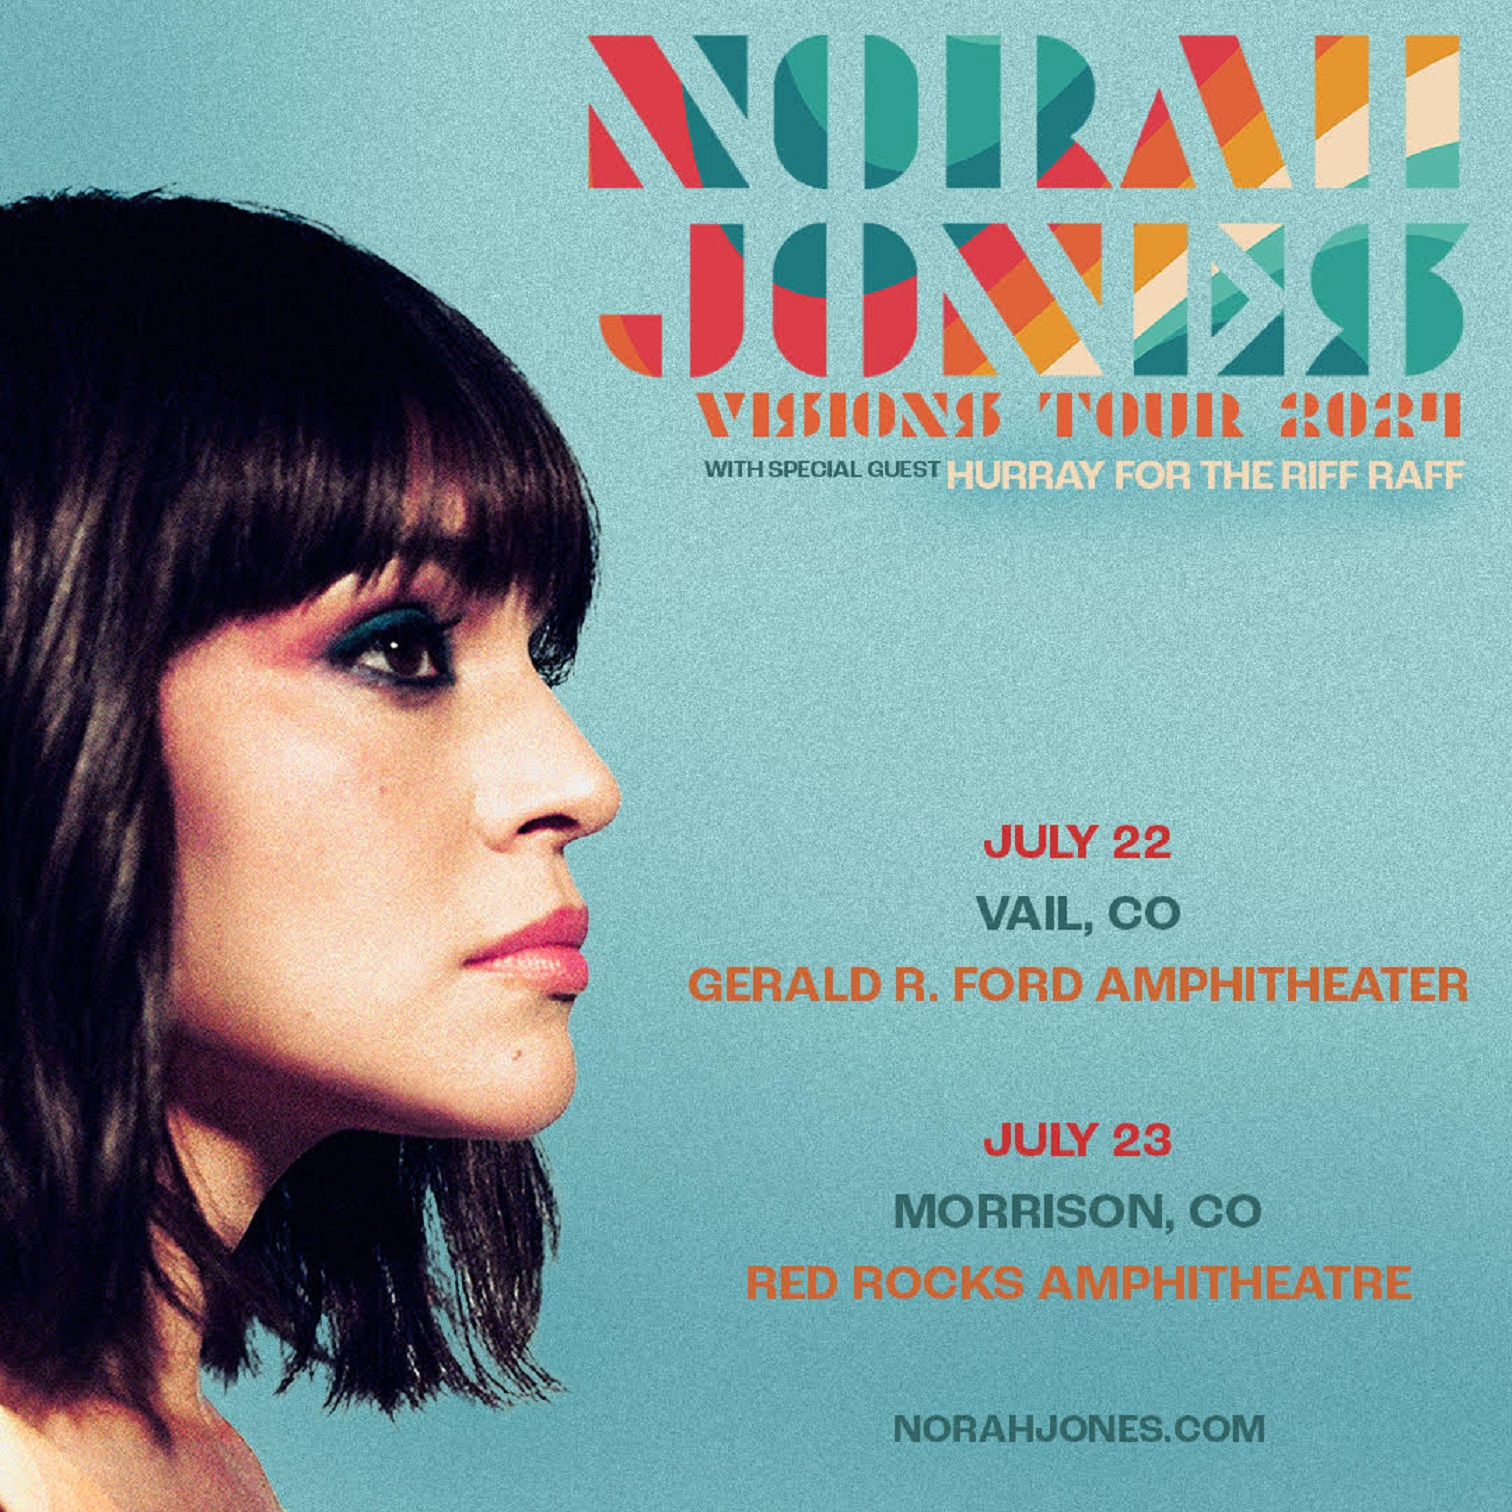 AEG Presents: Norah Jones Live in Colorado with Hurray for the Riff Raff